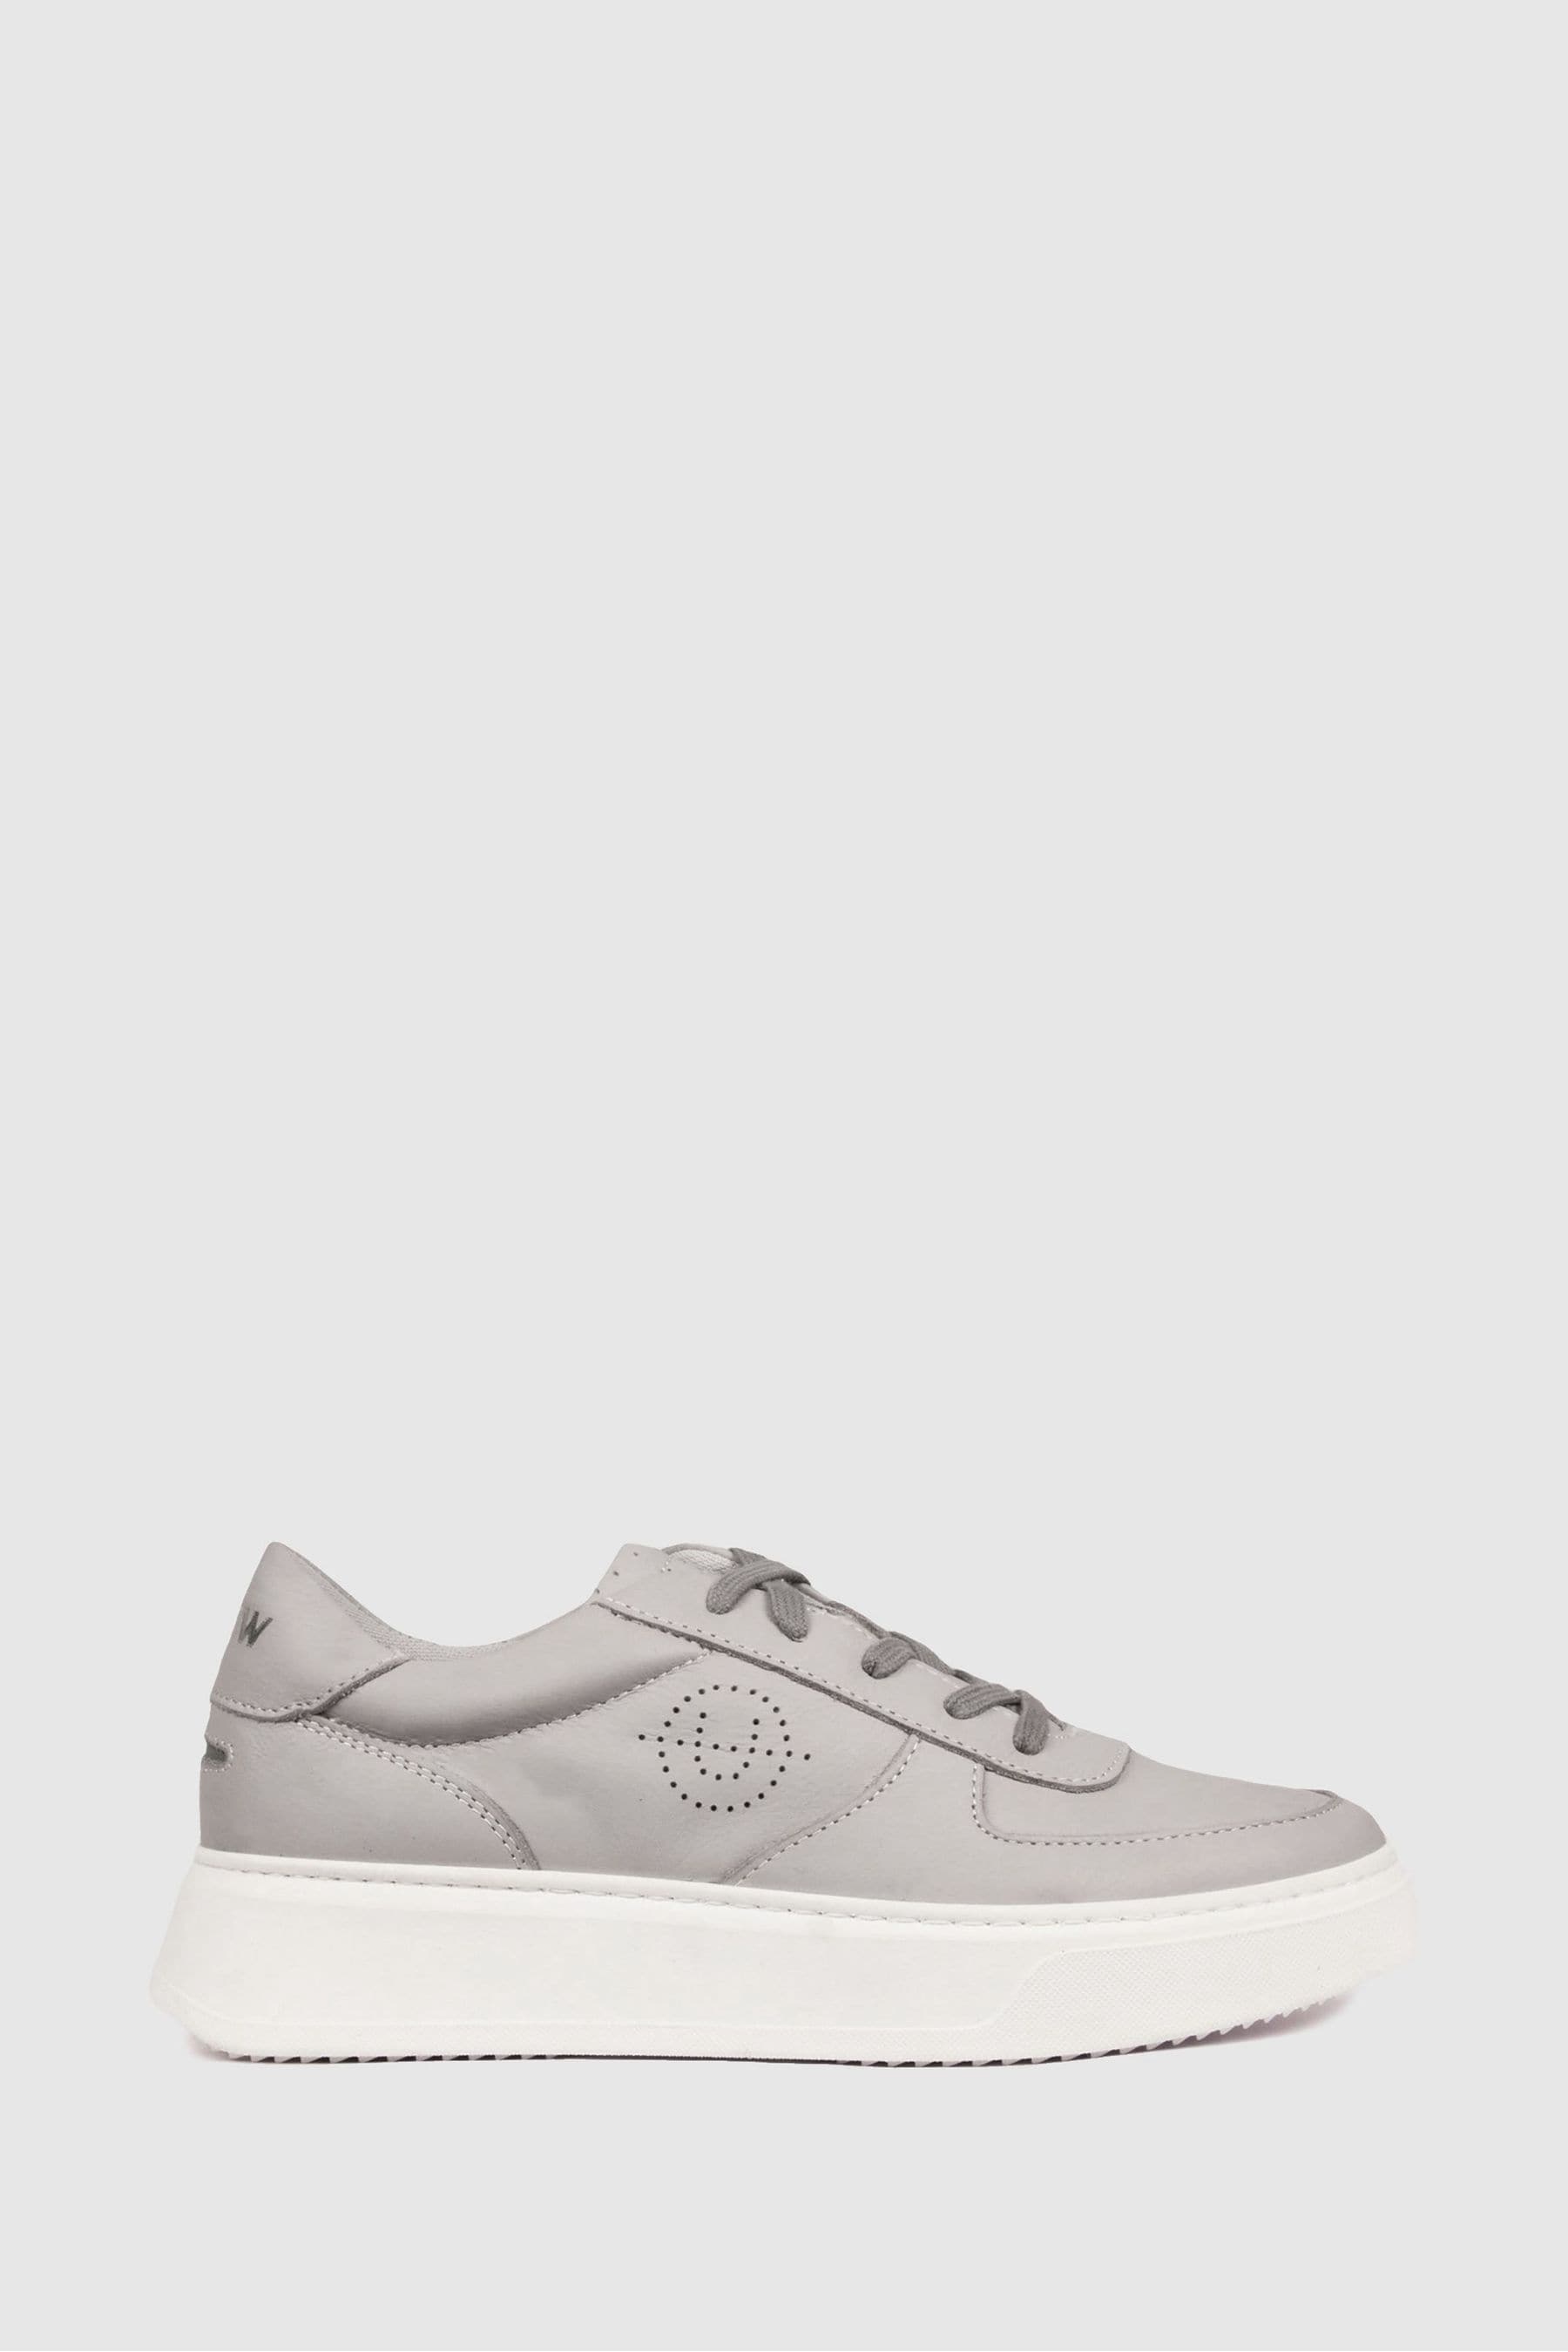 Unseen Footwear Leather Marais Trainers In Grey/white